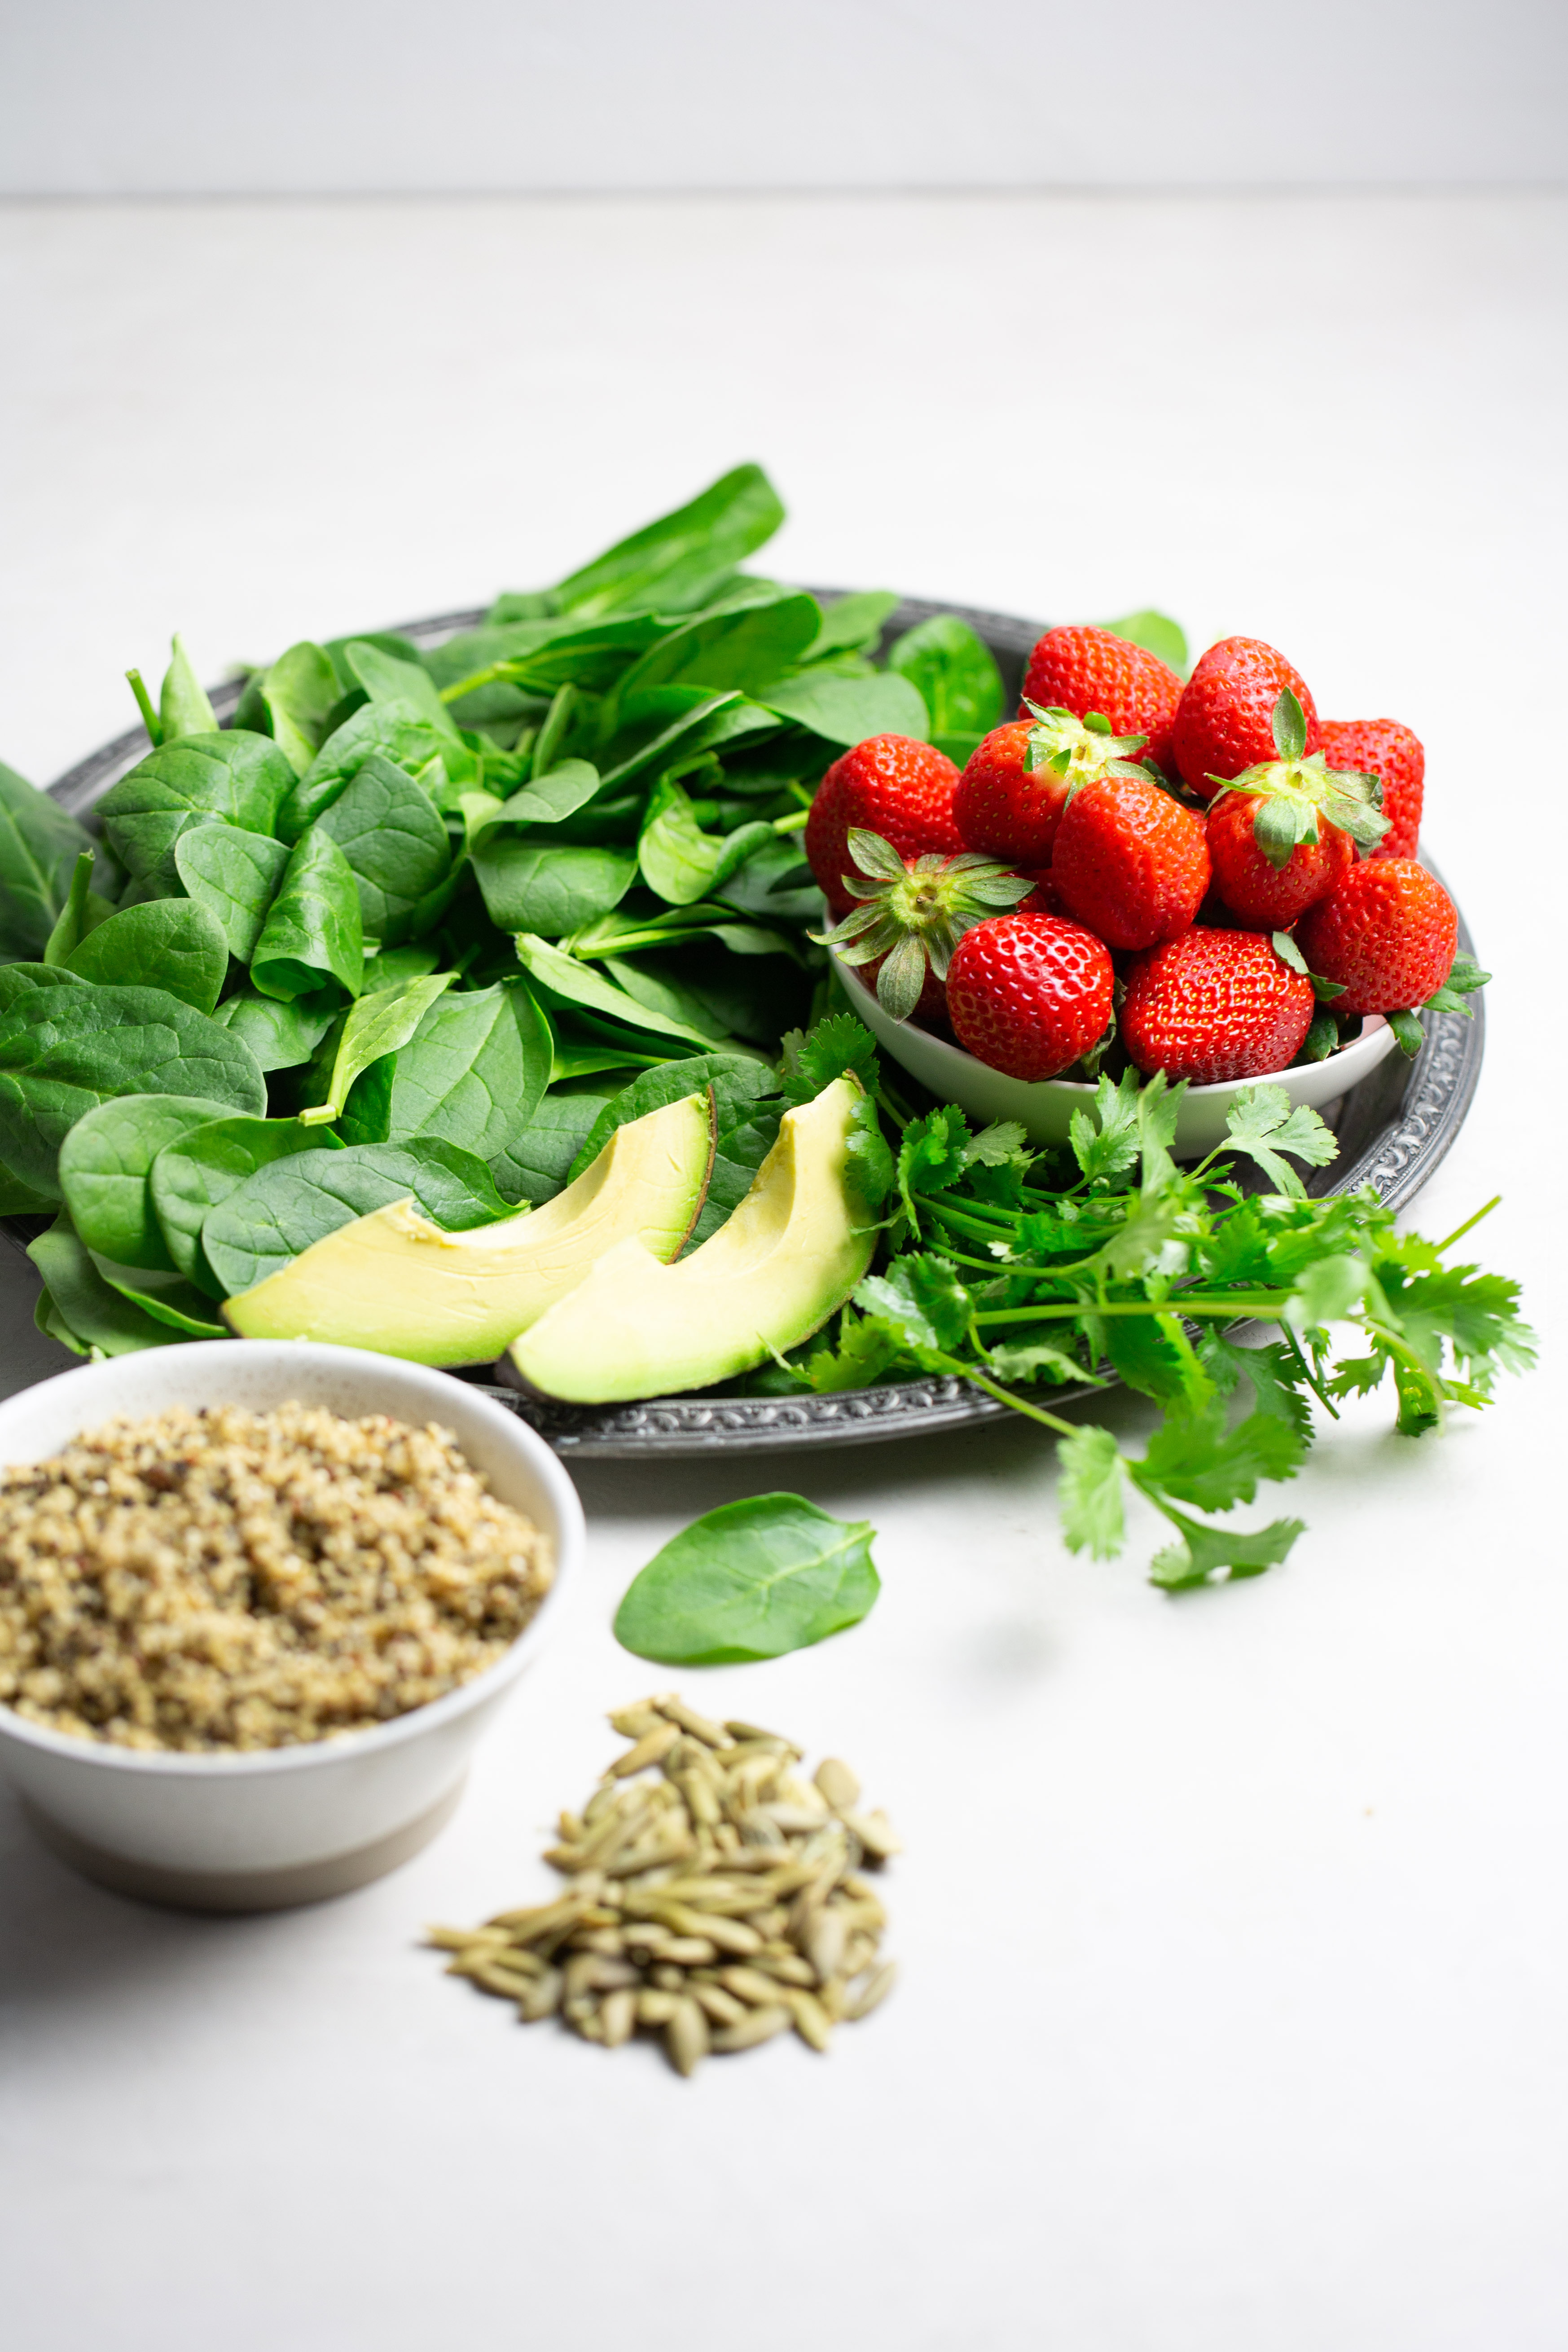 Plstter with spinach, strawberries, avocado and cilantro. A bowl of cooked quinoa on the side.